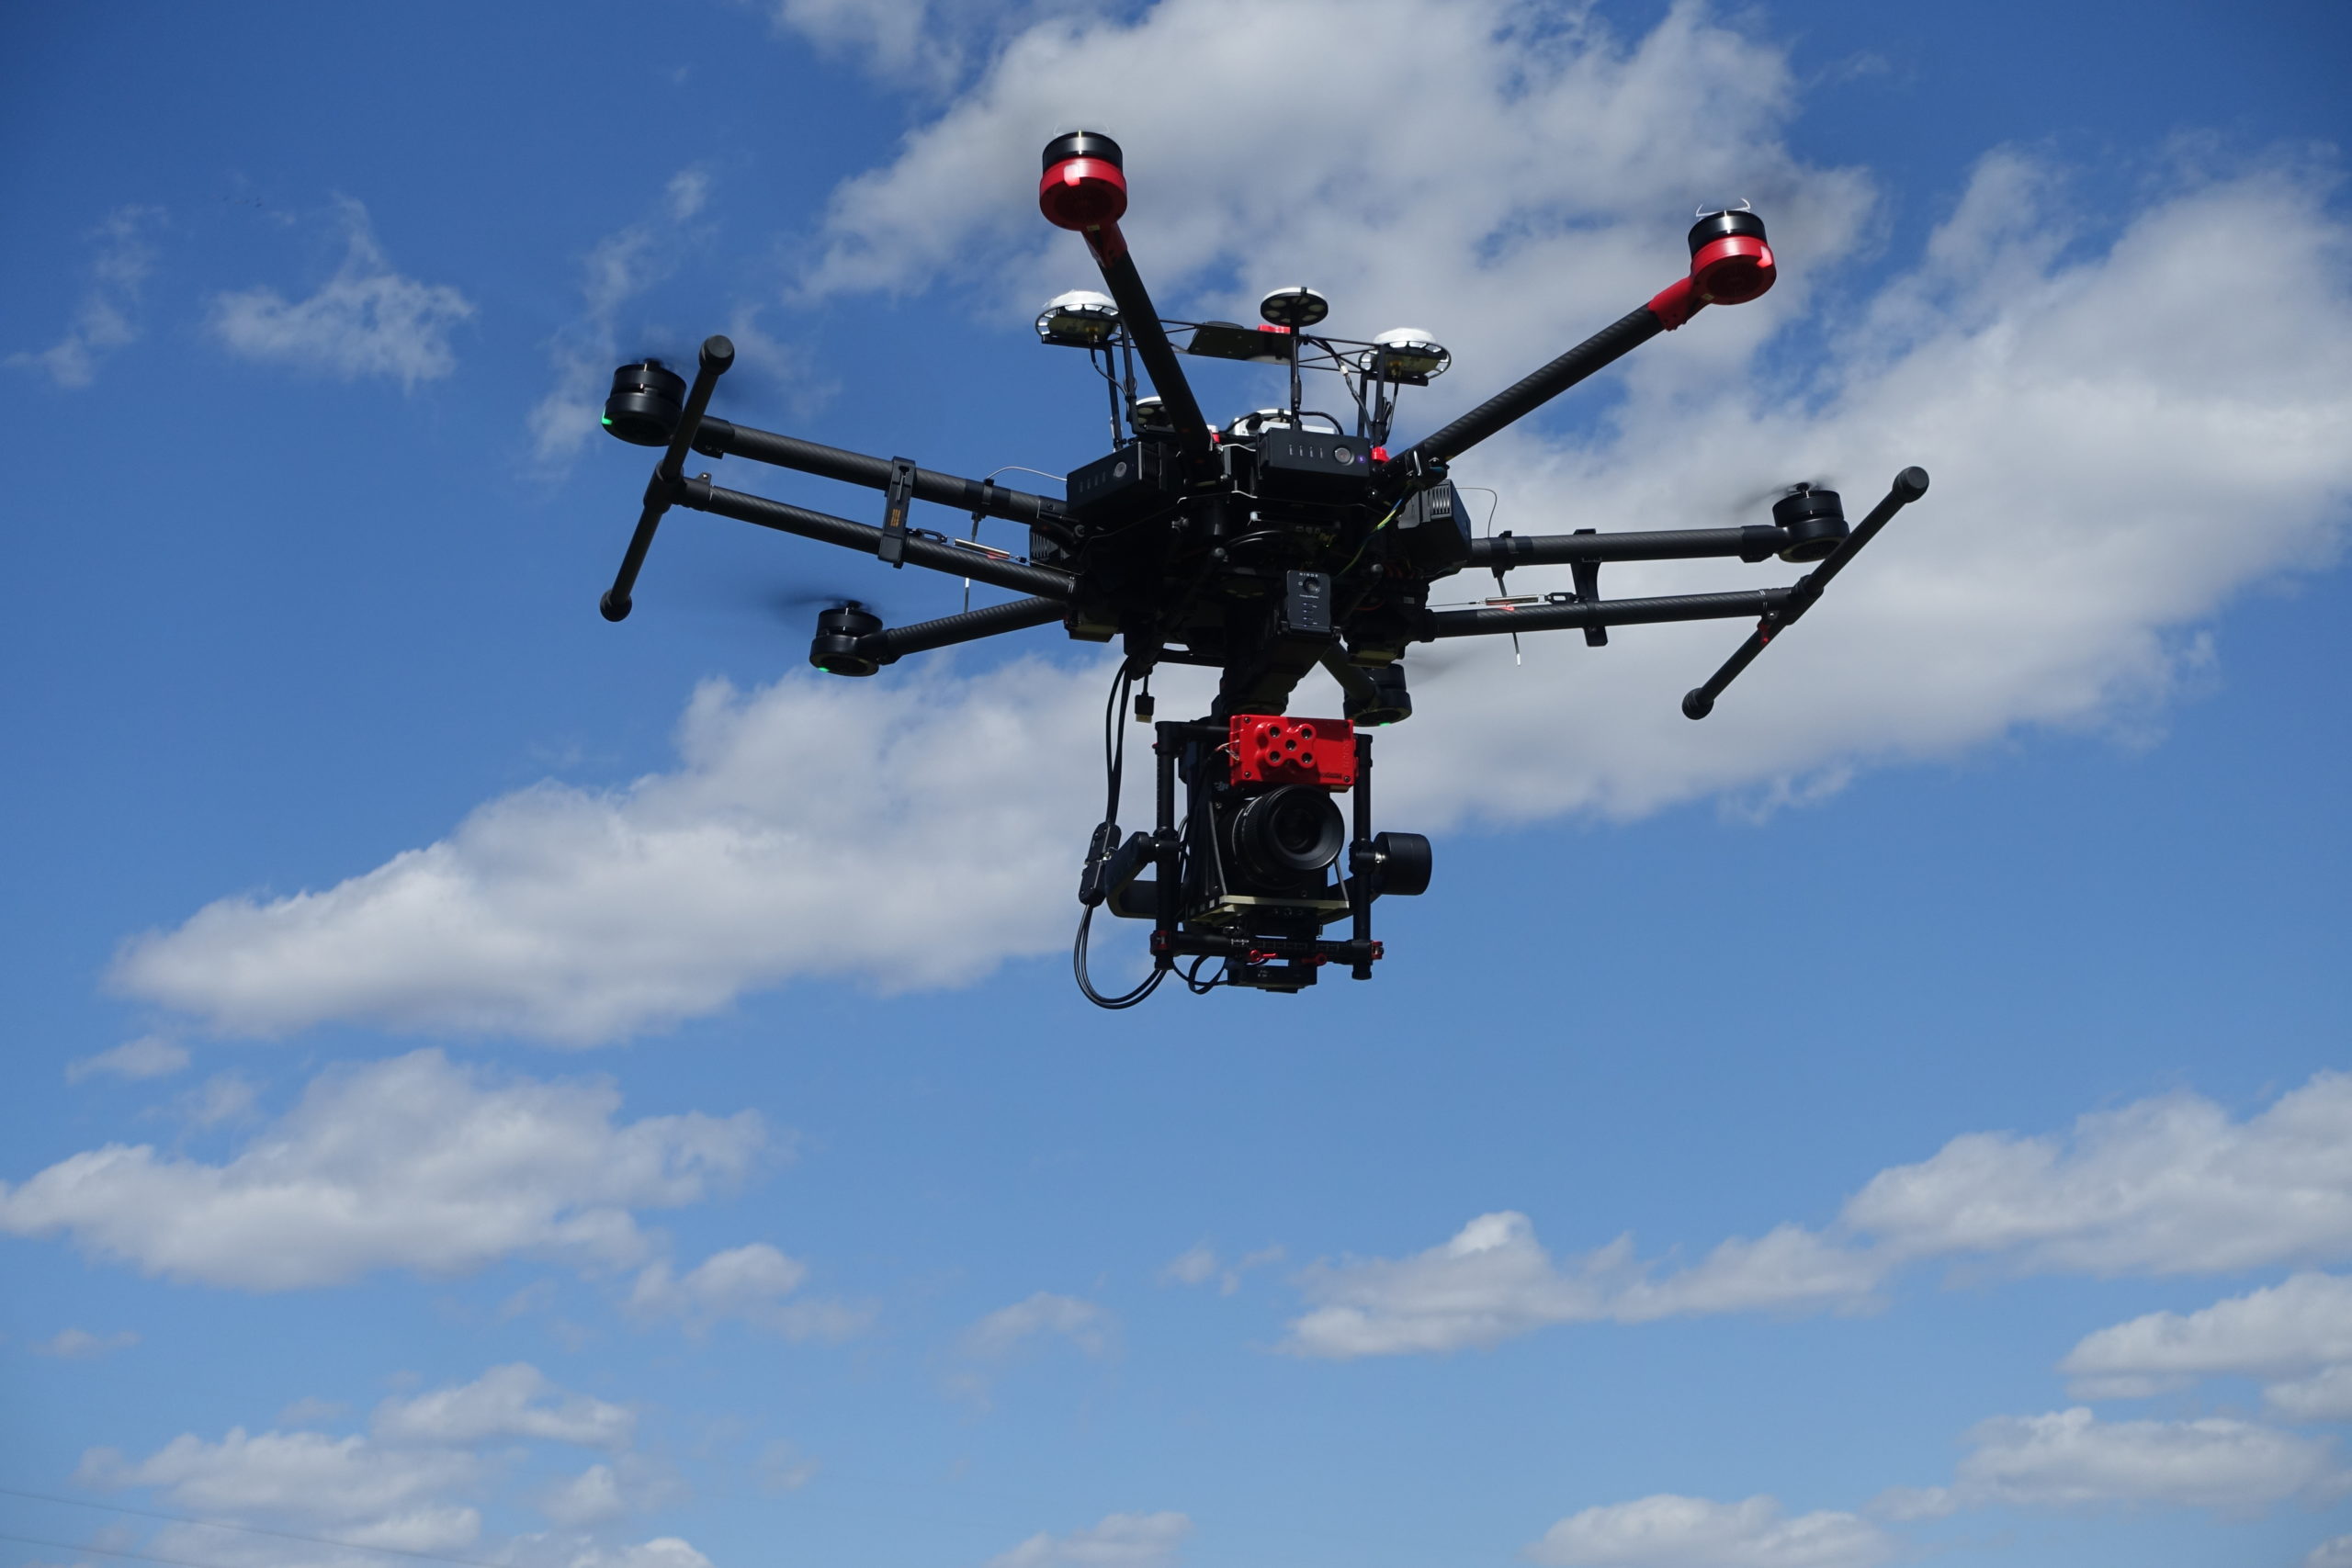 Drone equipped for geospatial data collection